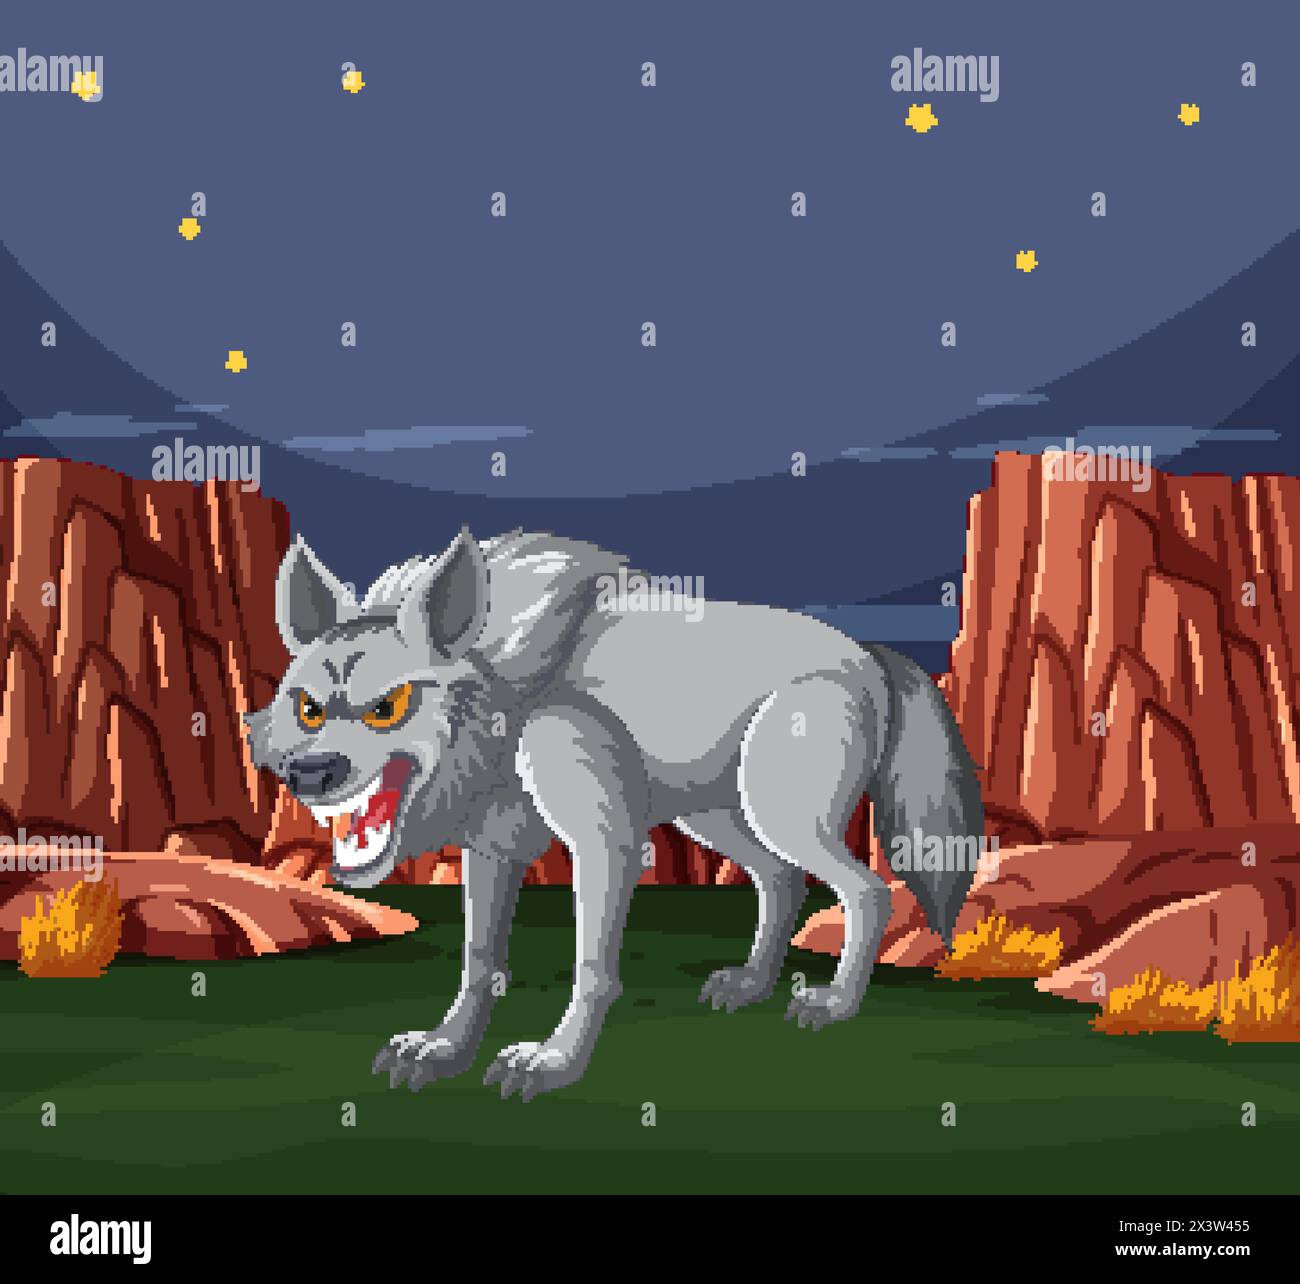 An aggressive wolf stands among rocky terrain. Stock Vector